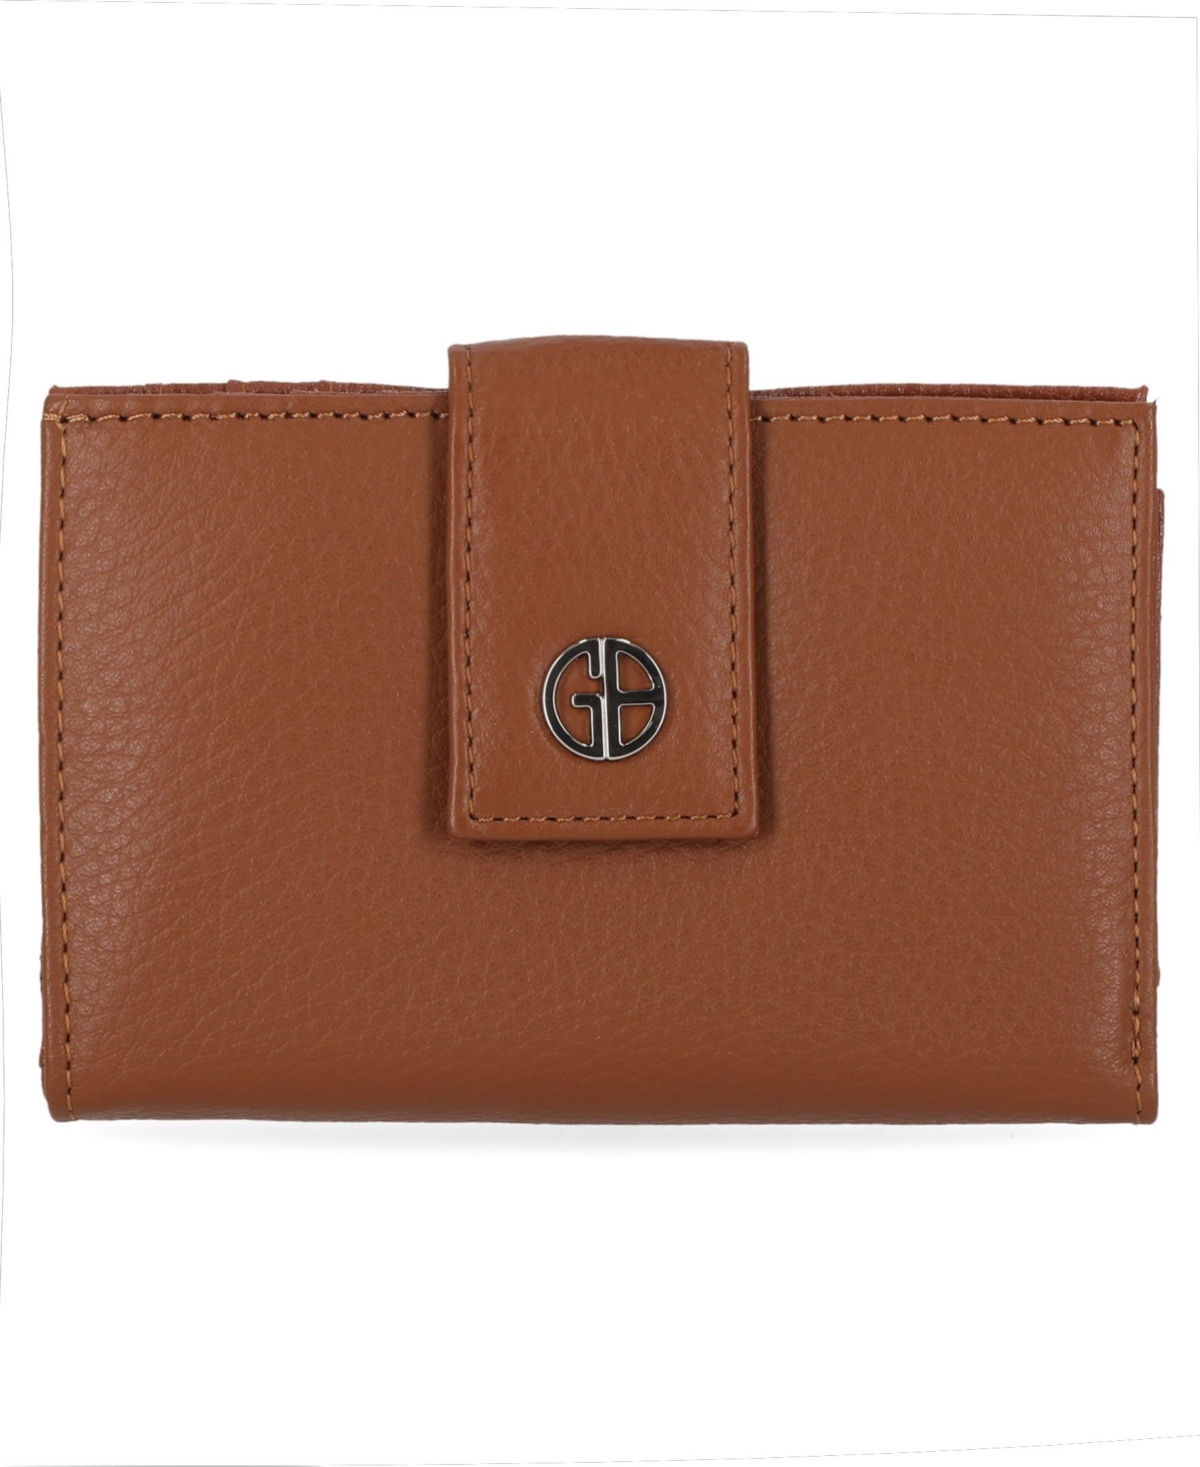 Framed Indexer Leather Wallet, Created for Macy's - Cognac/Silver